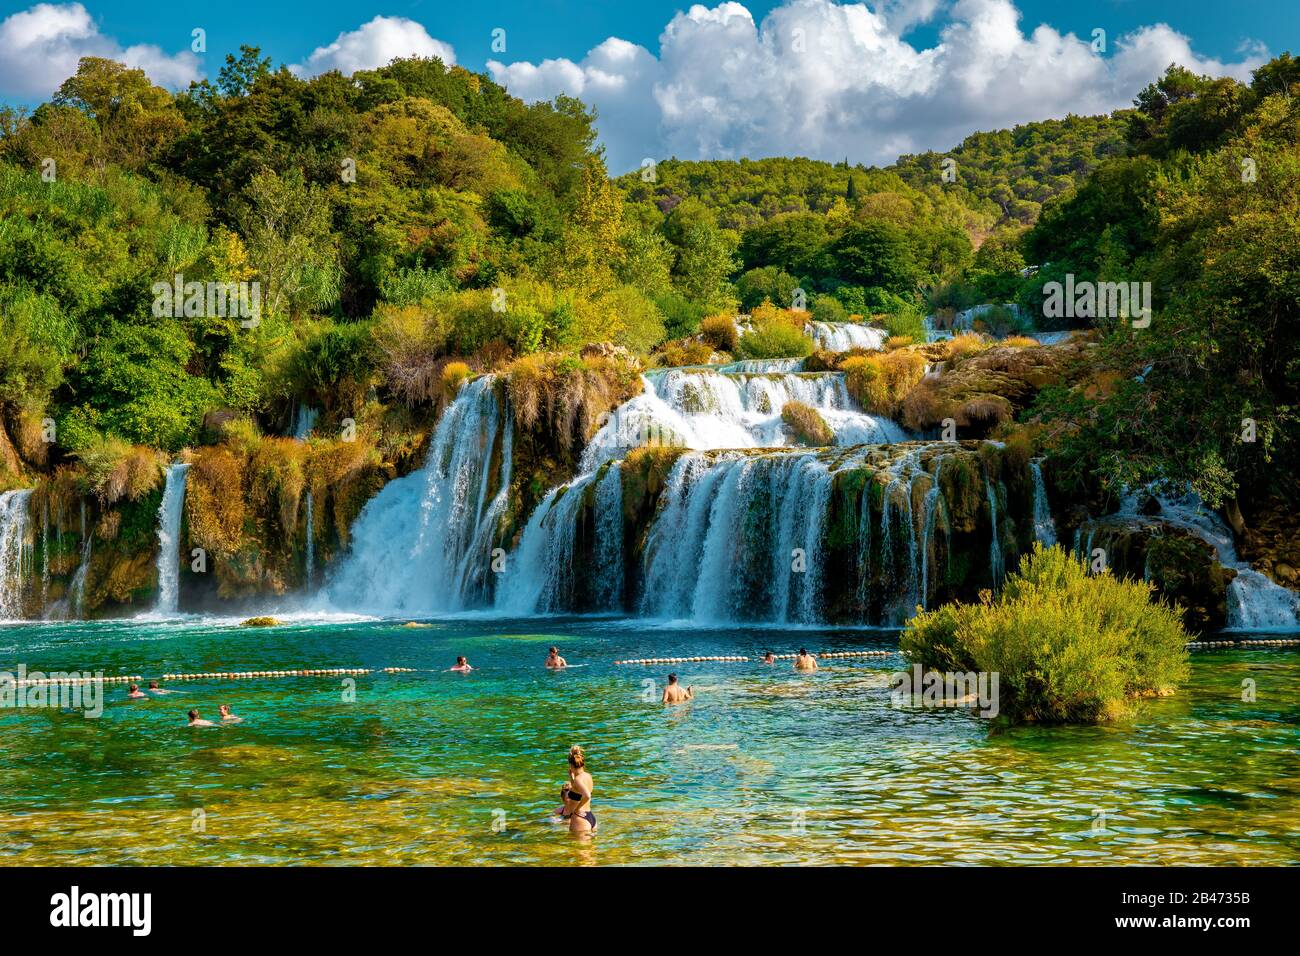 KRKA waterfalls Croatia September , krka national park Croatia on a bright summer evening with people relaxing in the water Stock Photo